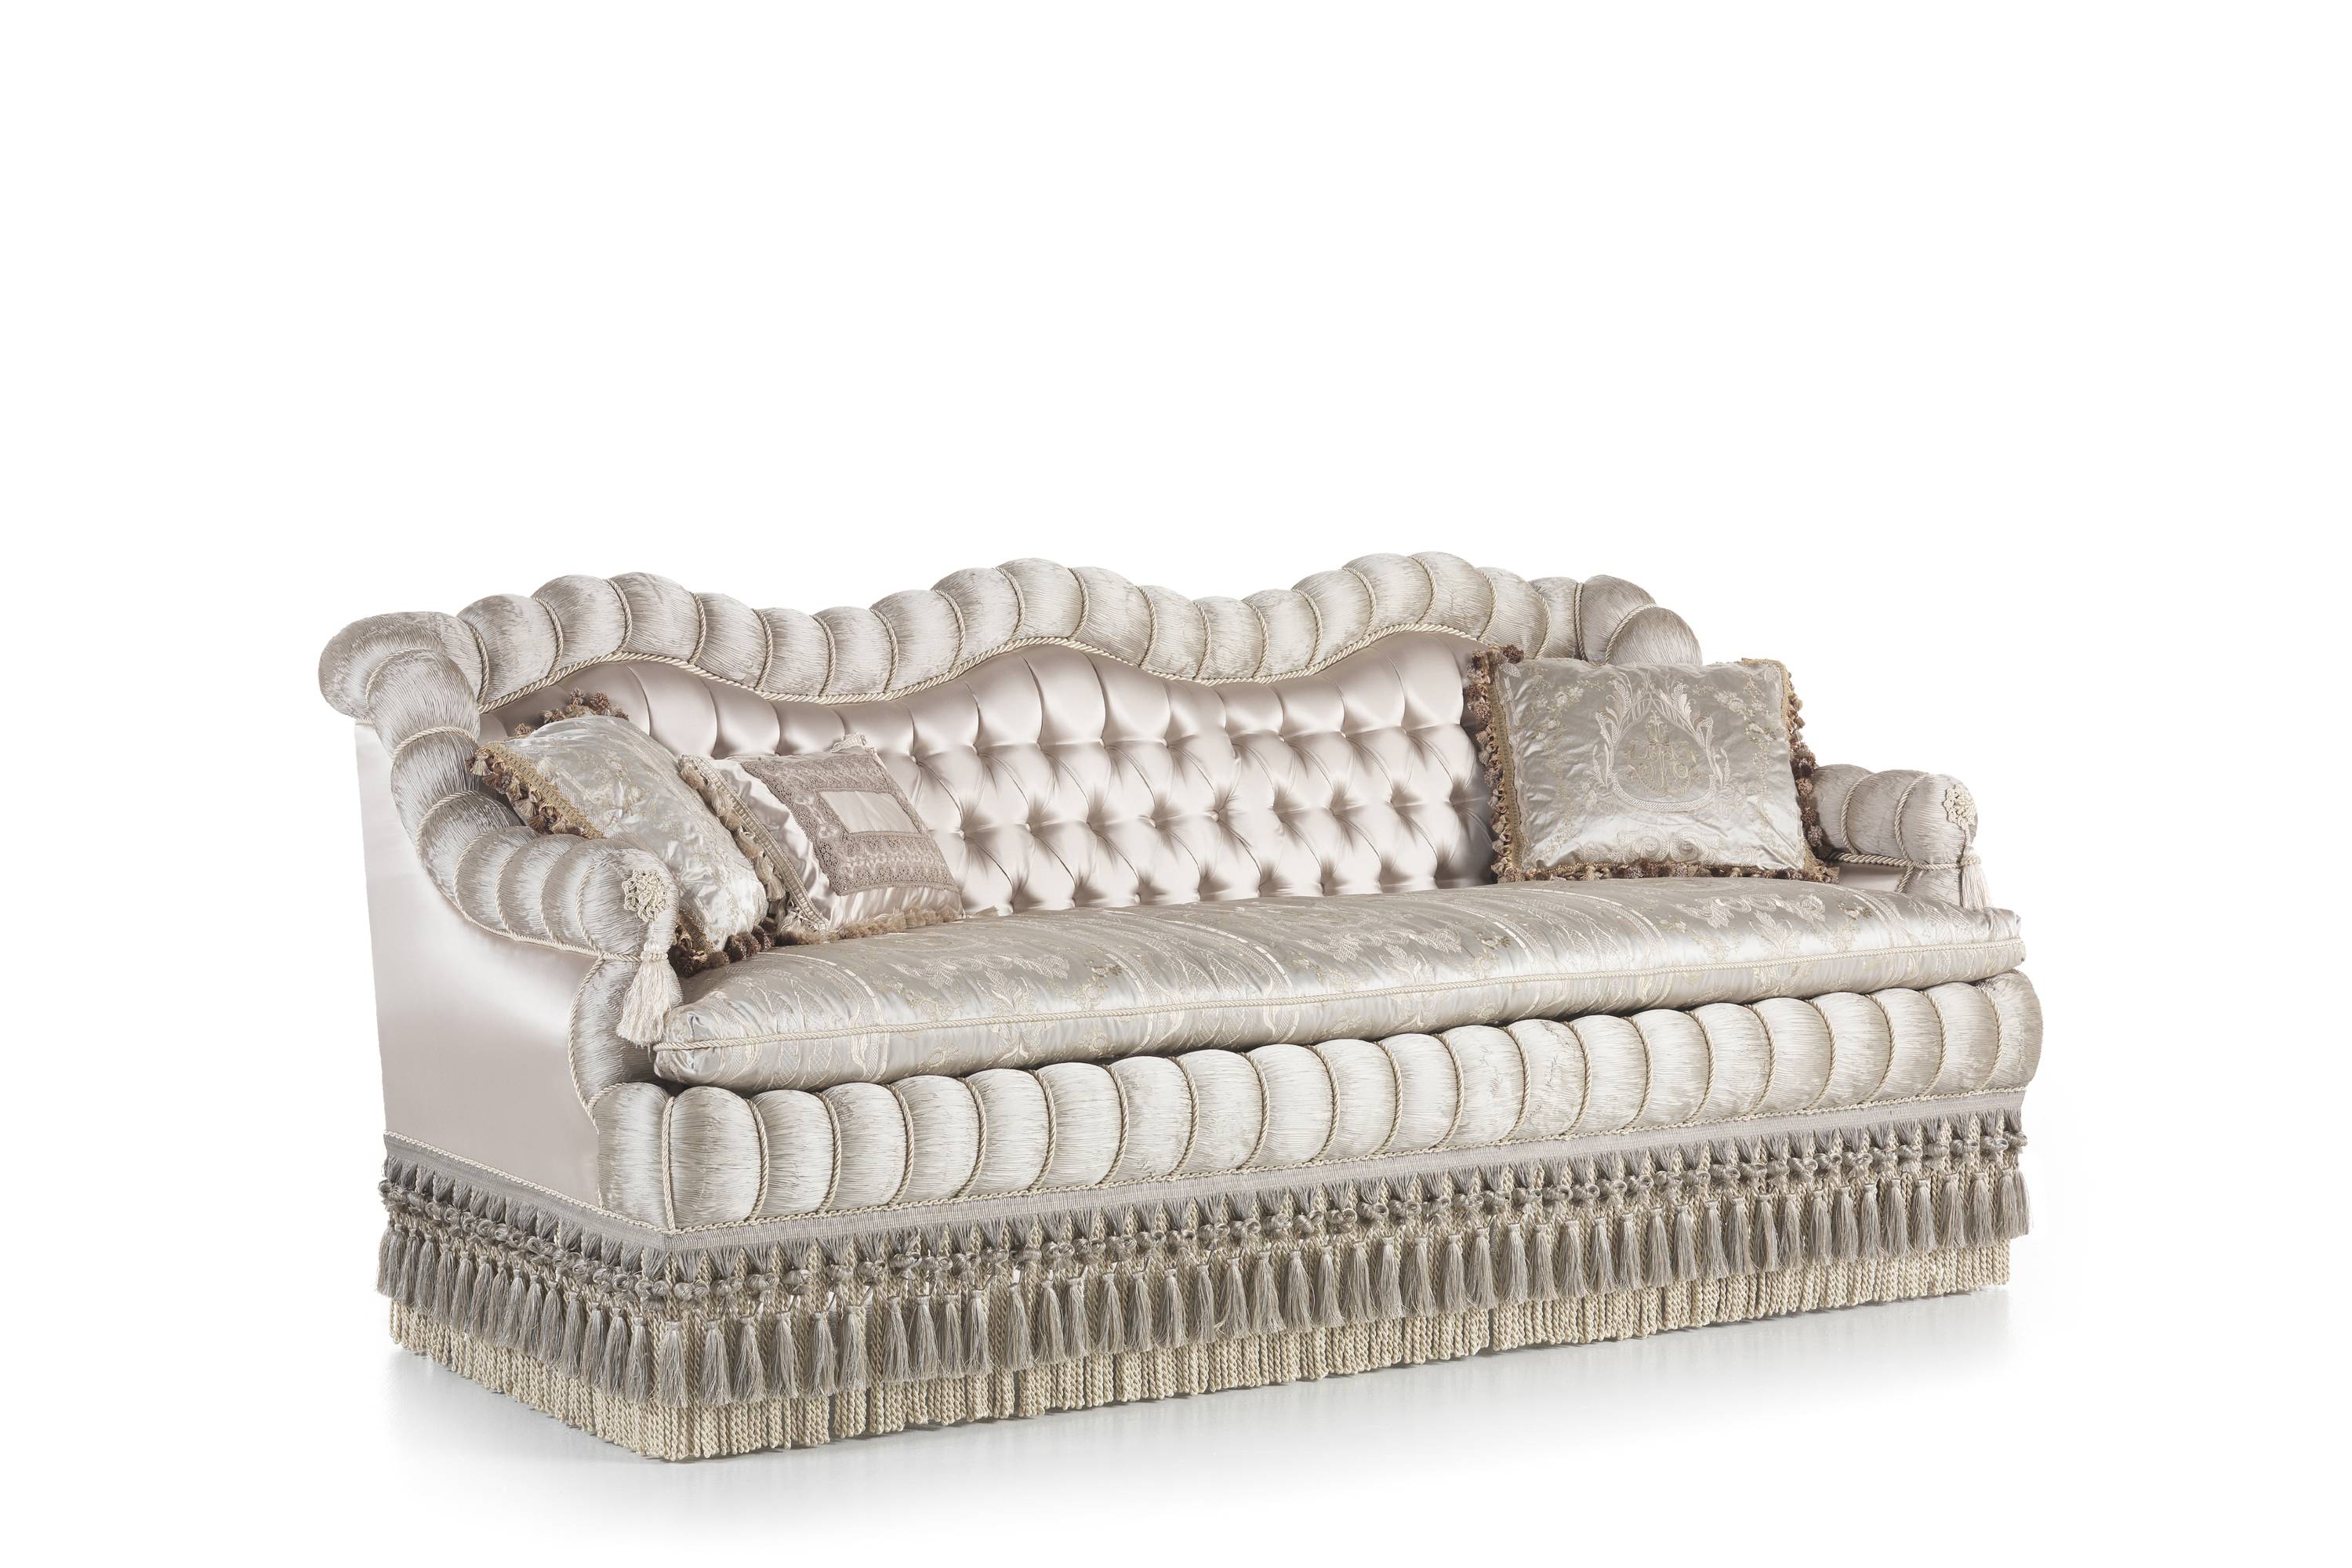 CANOVA 2-seater sofa - 3-seater sofa – Transform your space with luxury Made in Italy classic sofas of Domus collection.